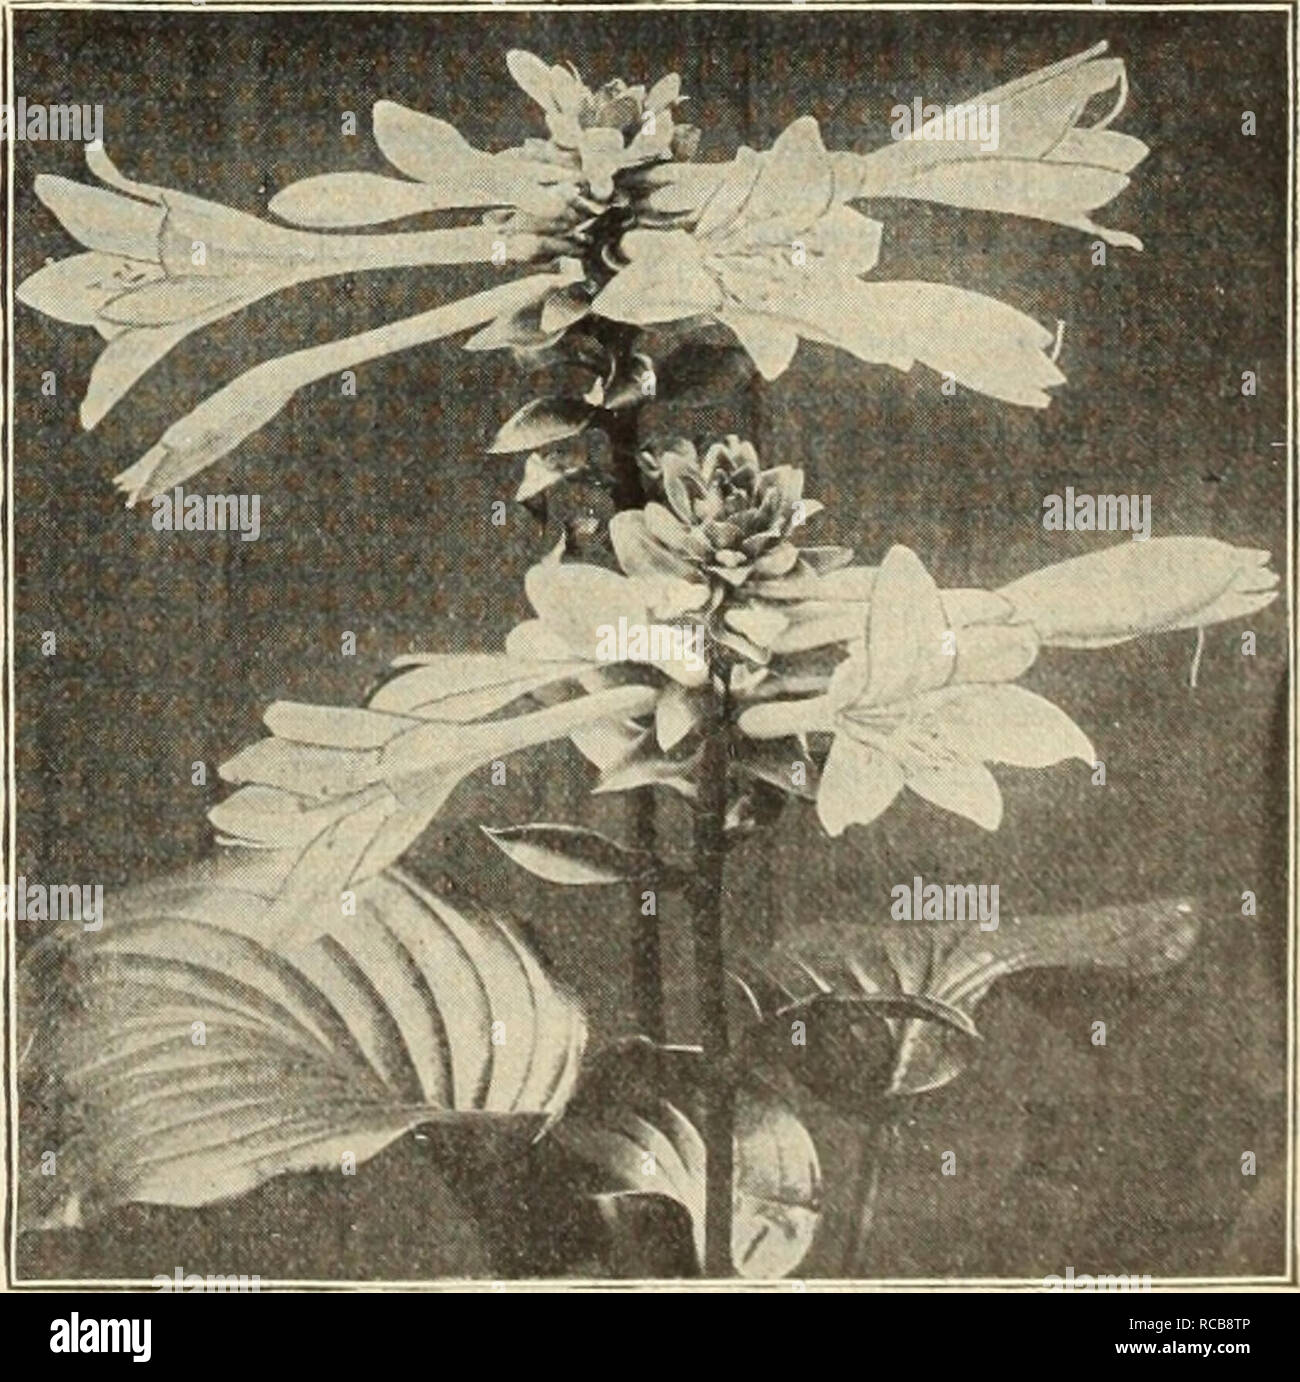 . Dreer's autumn catalogue, 1913. Horticultural products industry Catalogs; Nurseries (Horticulture) Catalogs; Nursery stock Catalogs; Plants, Ornamental Catalogs; Flowers Catalogs. Digitalis (Foxglove) . DIGITALIS The Foxglove, old-fashioned, dign their period of flowering dominate the Gloxinaeflora ( Oloxinia-fiowered) finely-spotted varieties. We offer Lilac, Rose or 3fi.red. Ambigua, or Grandiflora. Show veined brown. EUPHORBIA Milkwort). Corollata (Flowering Spurge). A most showy and useful native plant, grow- ing about 18 inches high, and bearing from June till August umbels of pure whit Stock Photo